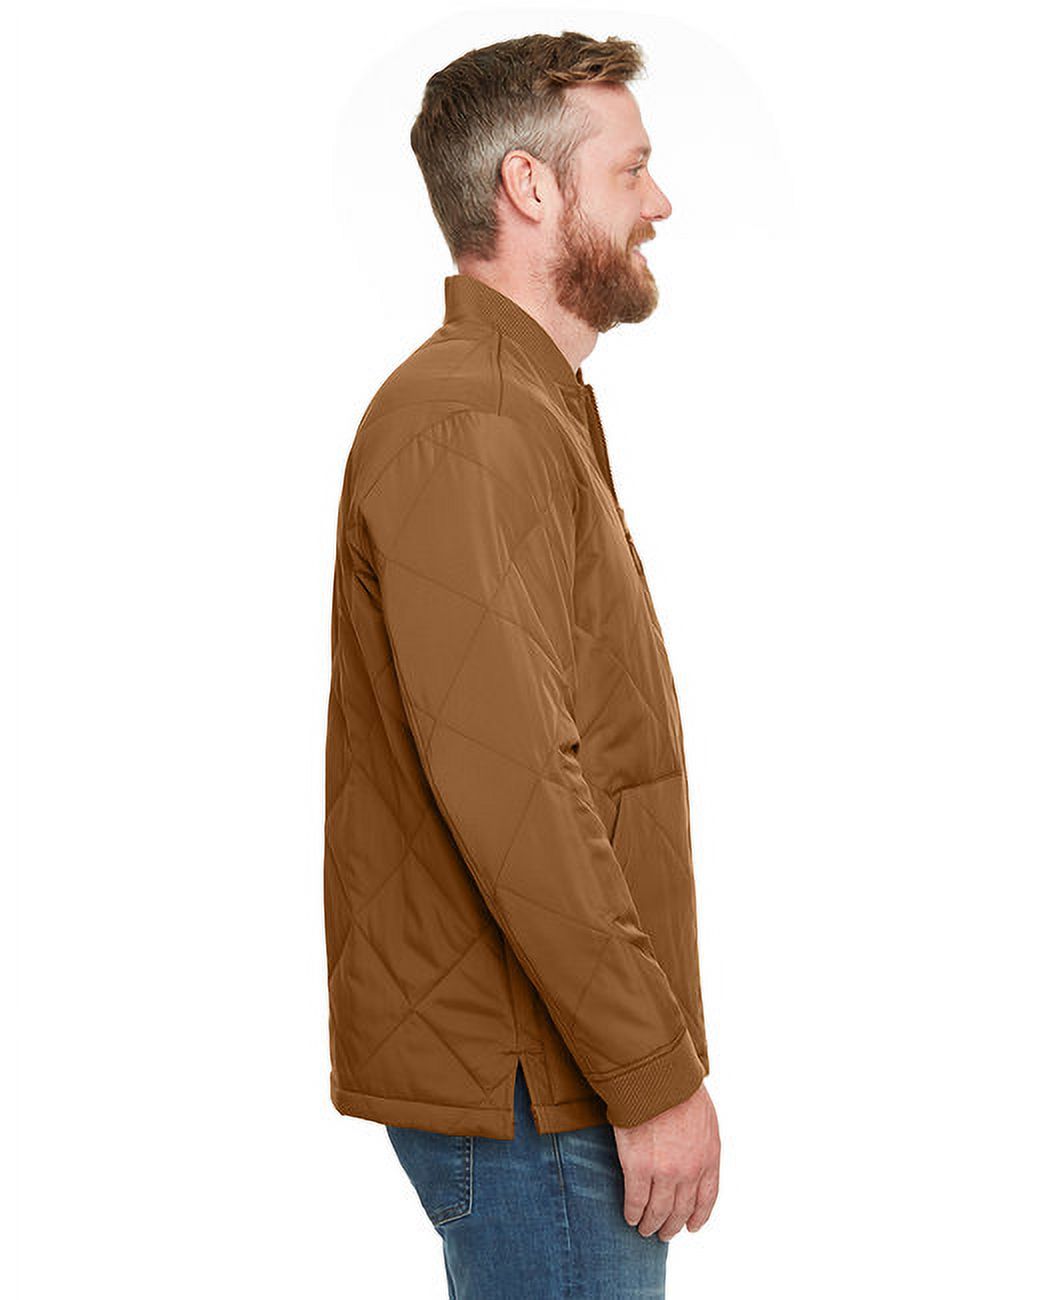 Adult Dockside Insulated Utility Jacket - DUCK BROWN - 4XL - image 3 of 3